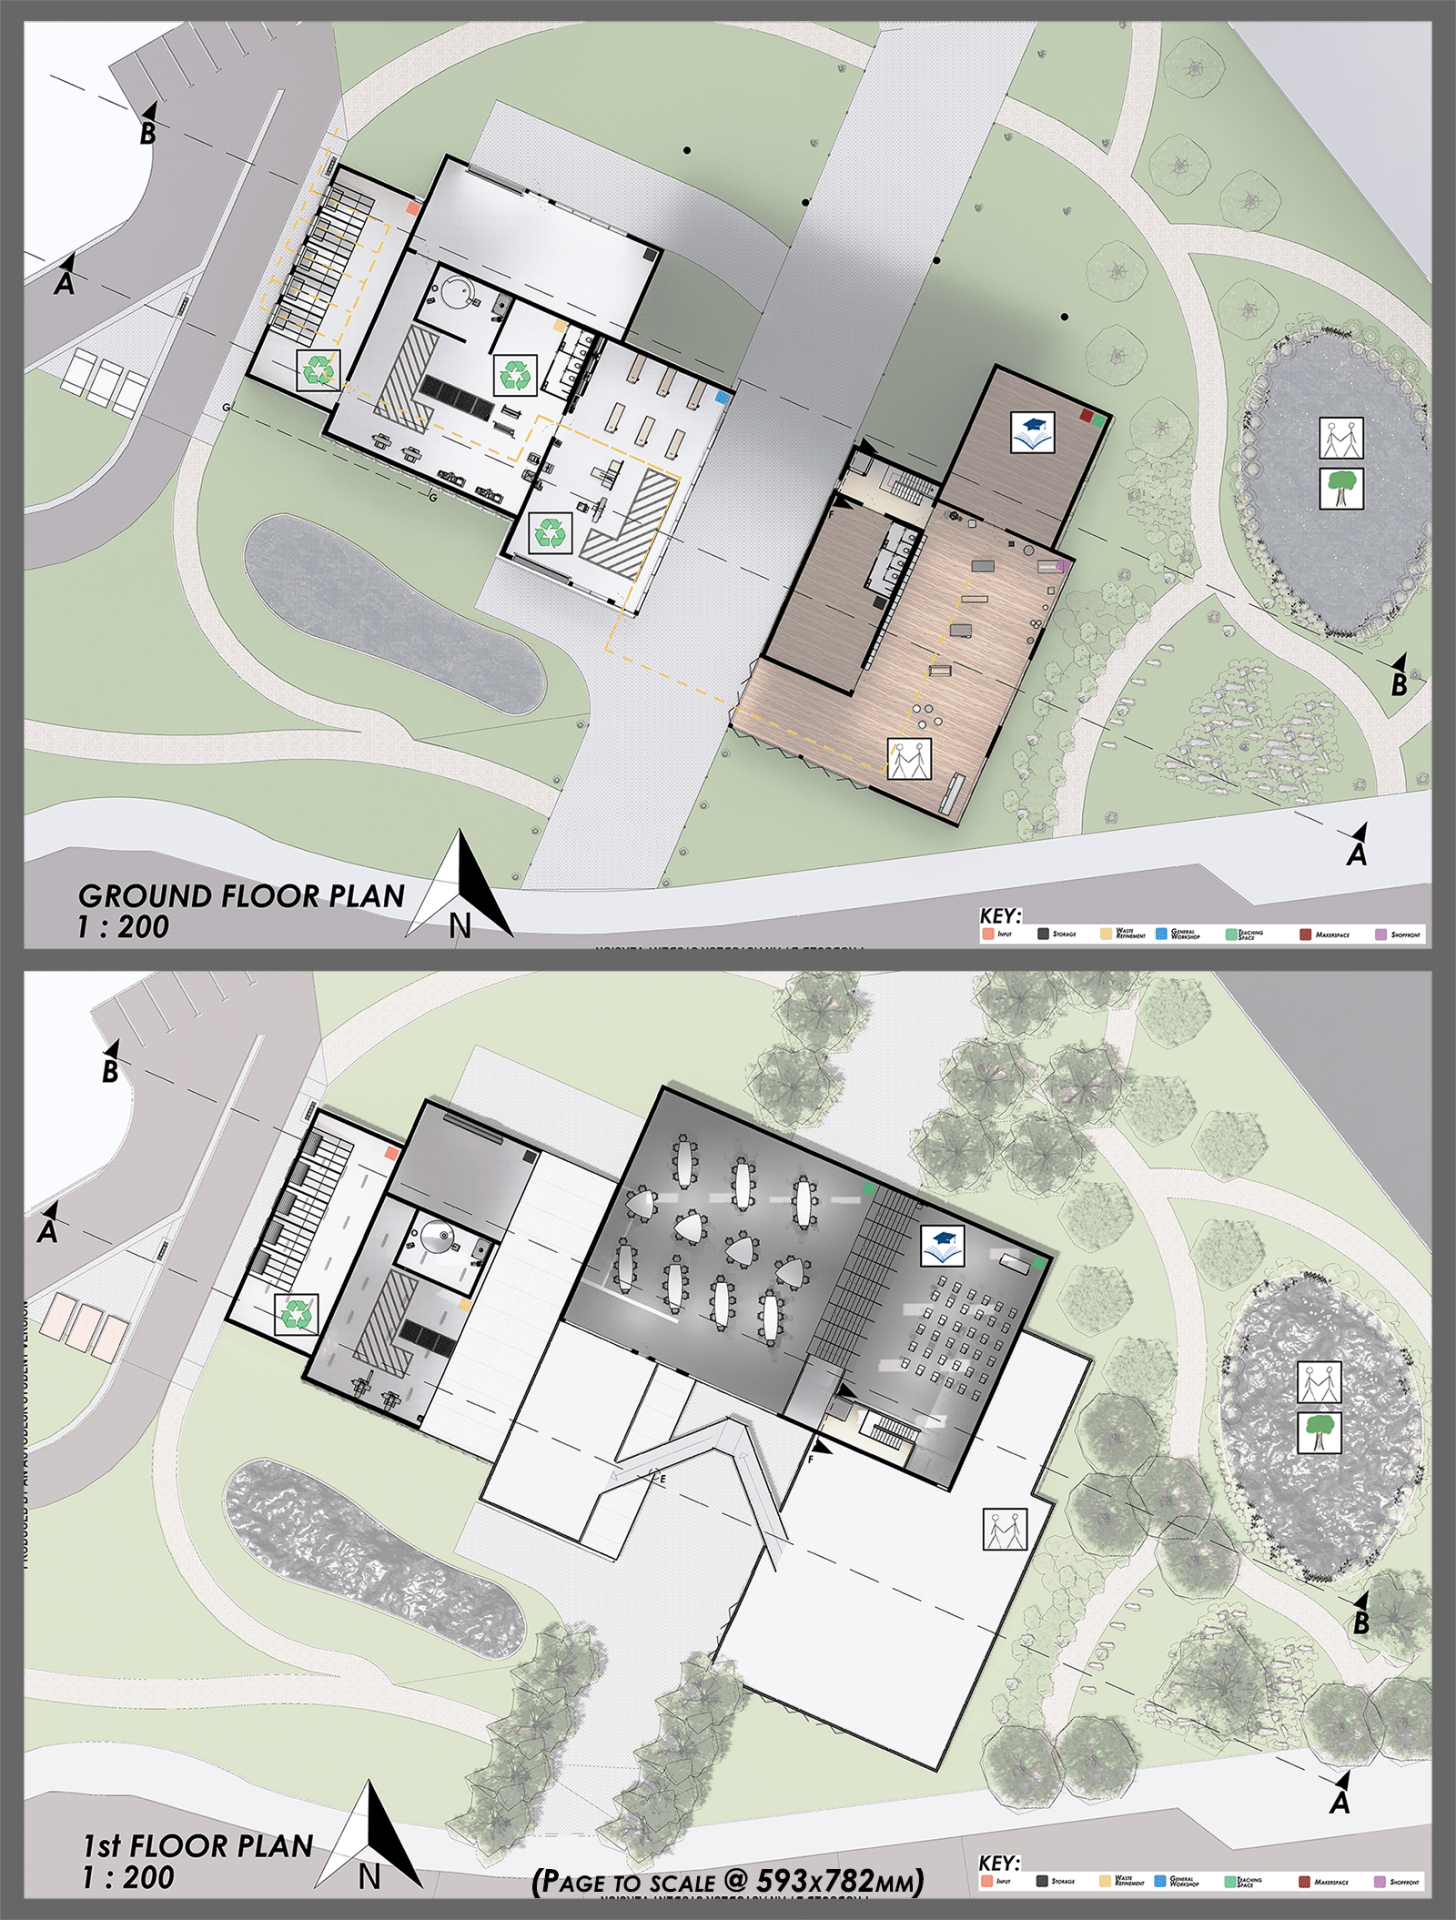 Graphic of the ground and 1st floor plans of the development.